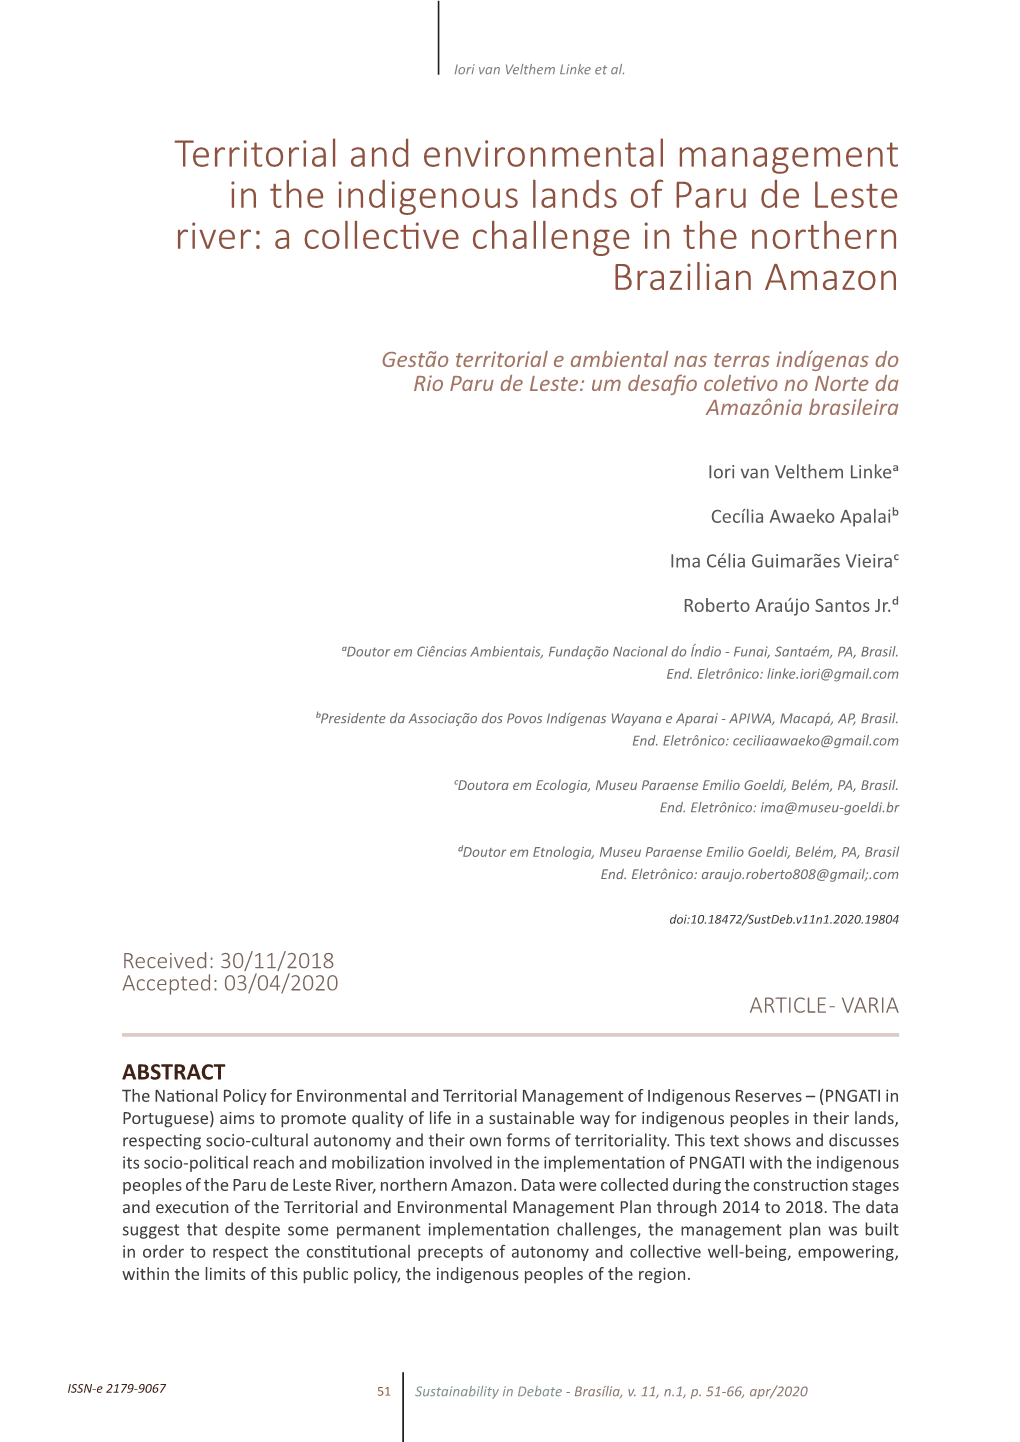 Territorial and Environmental Management in the Indigenous Lands of Paru De Leste River: a Collective Challenge in the Northern Brazilian Amazon